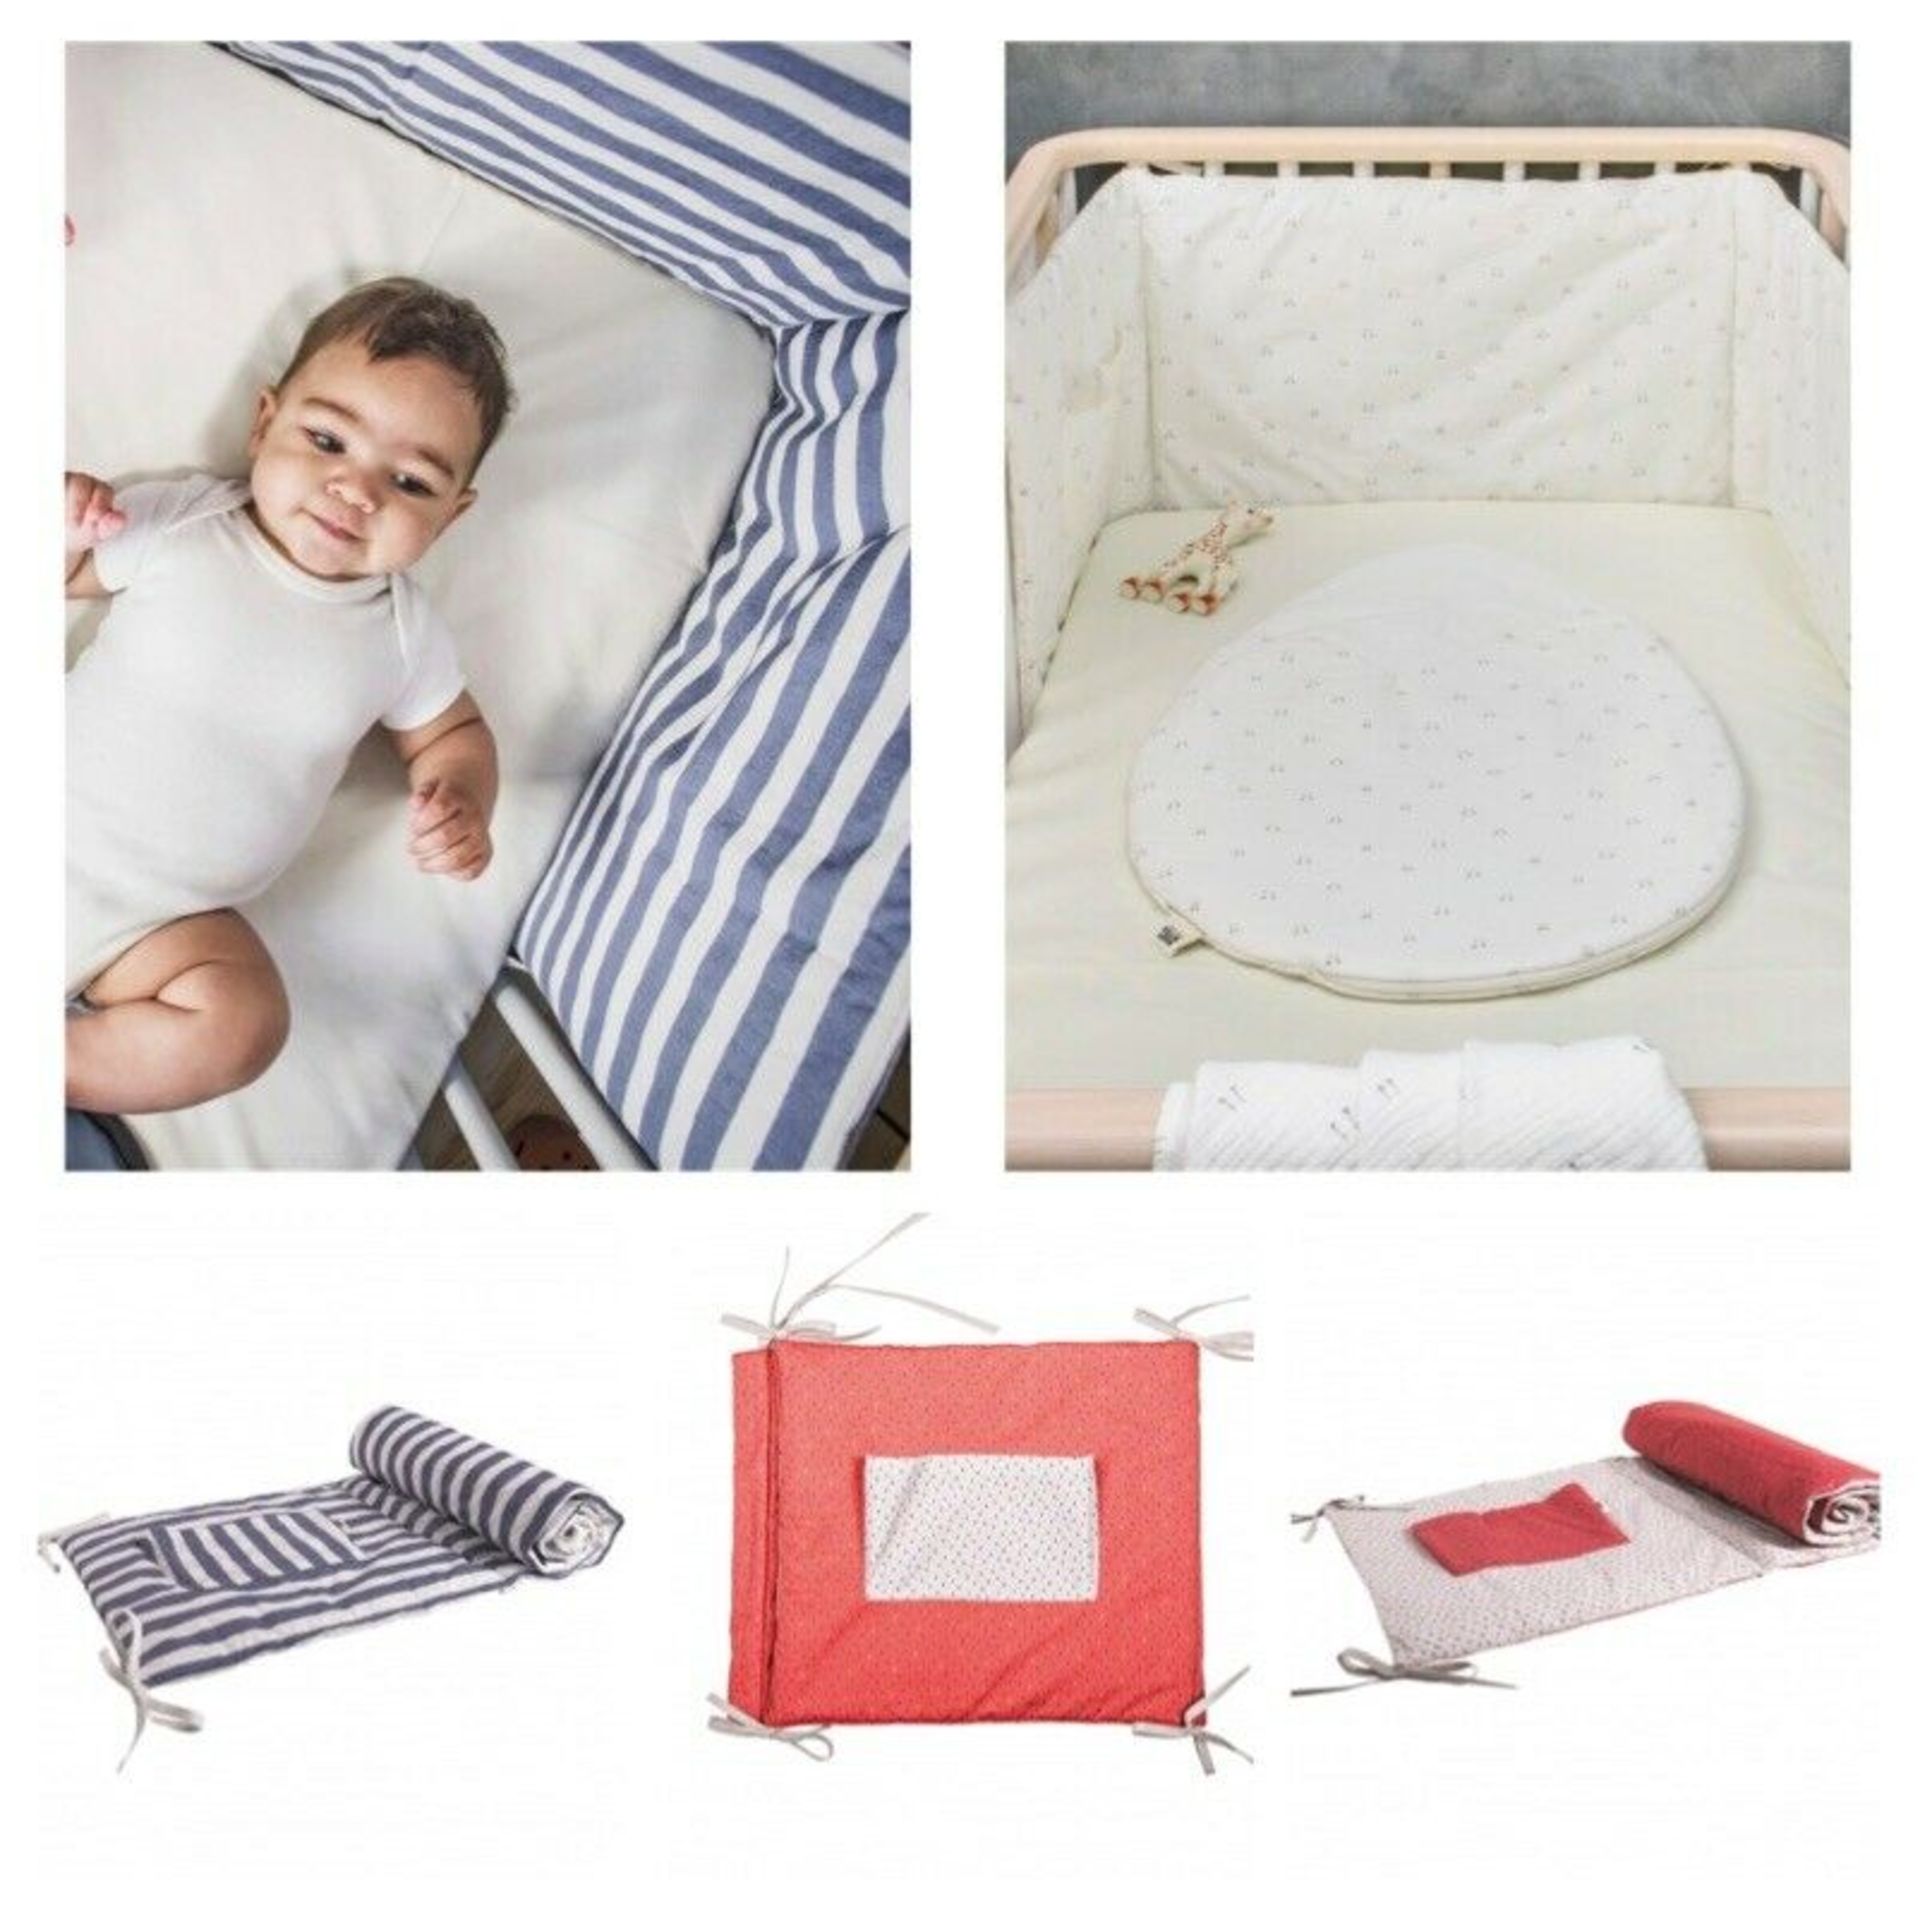 36 Baby Padded Cot Liners | Crib Rail Cover One-Piece Bumper Cot Bumper (RRP 29.99 Each) - Image 8 of 17